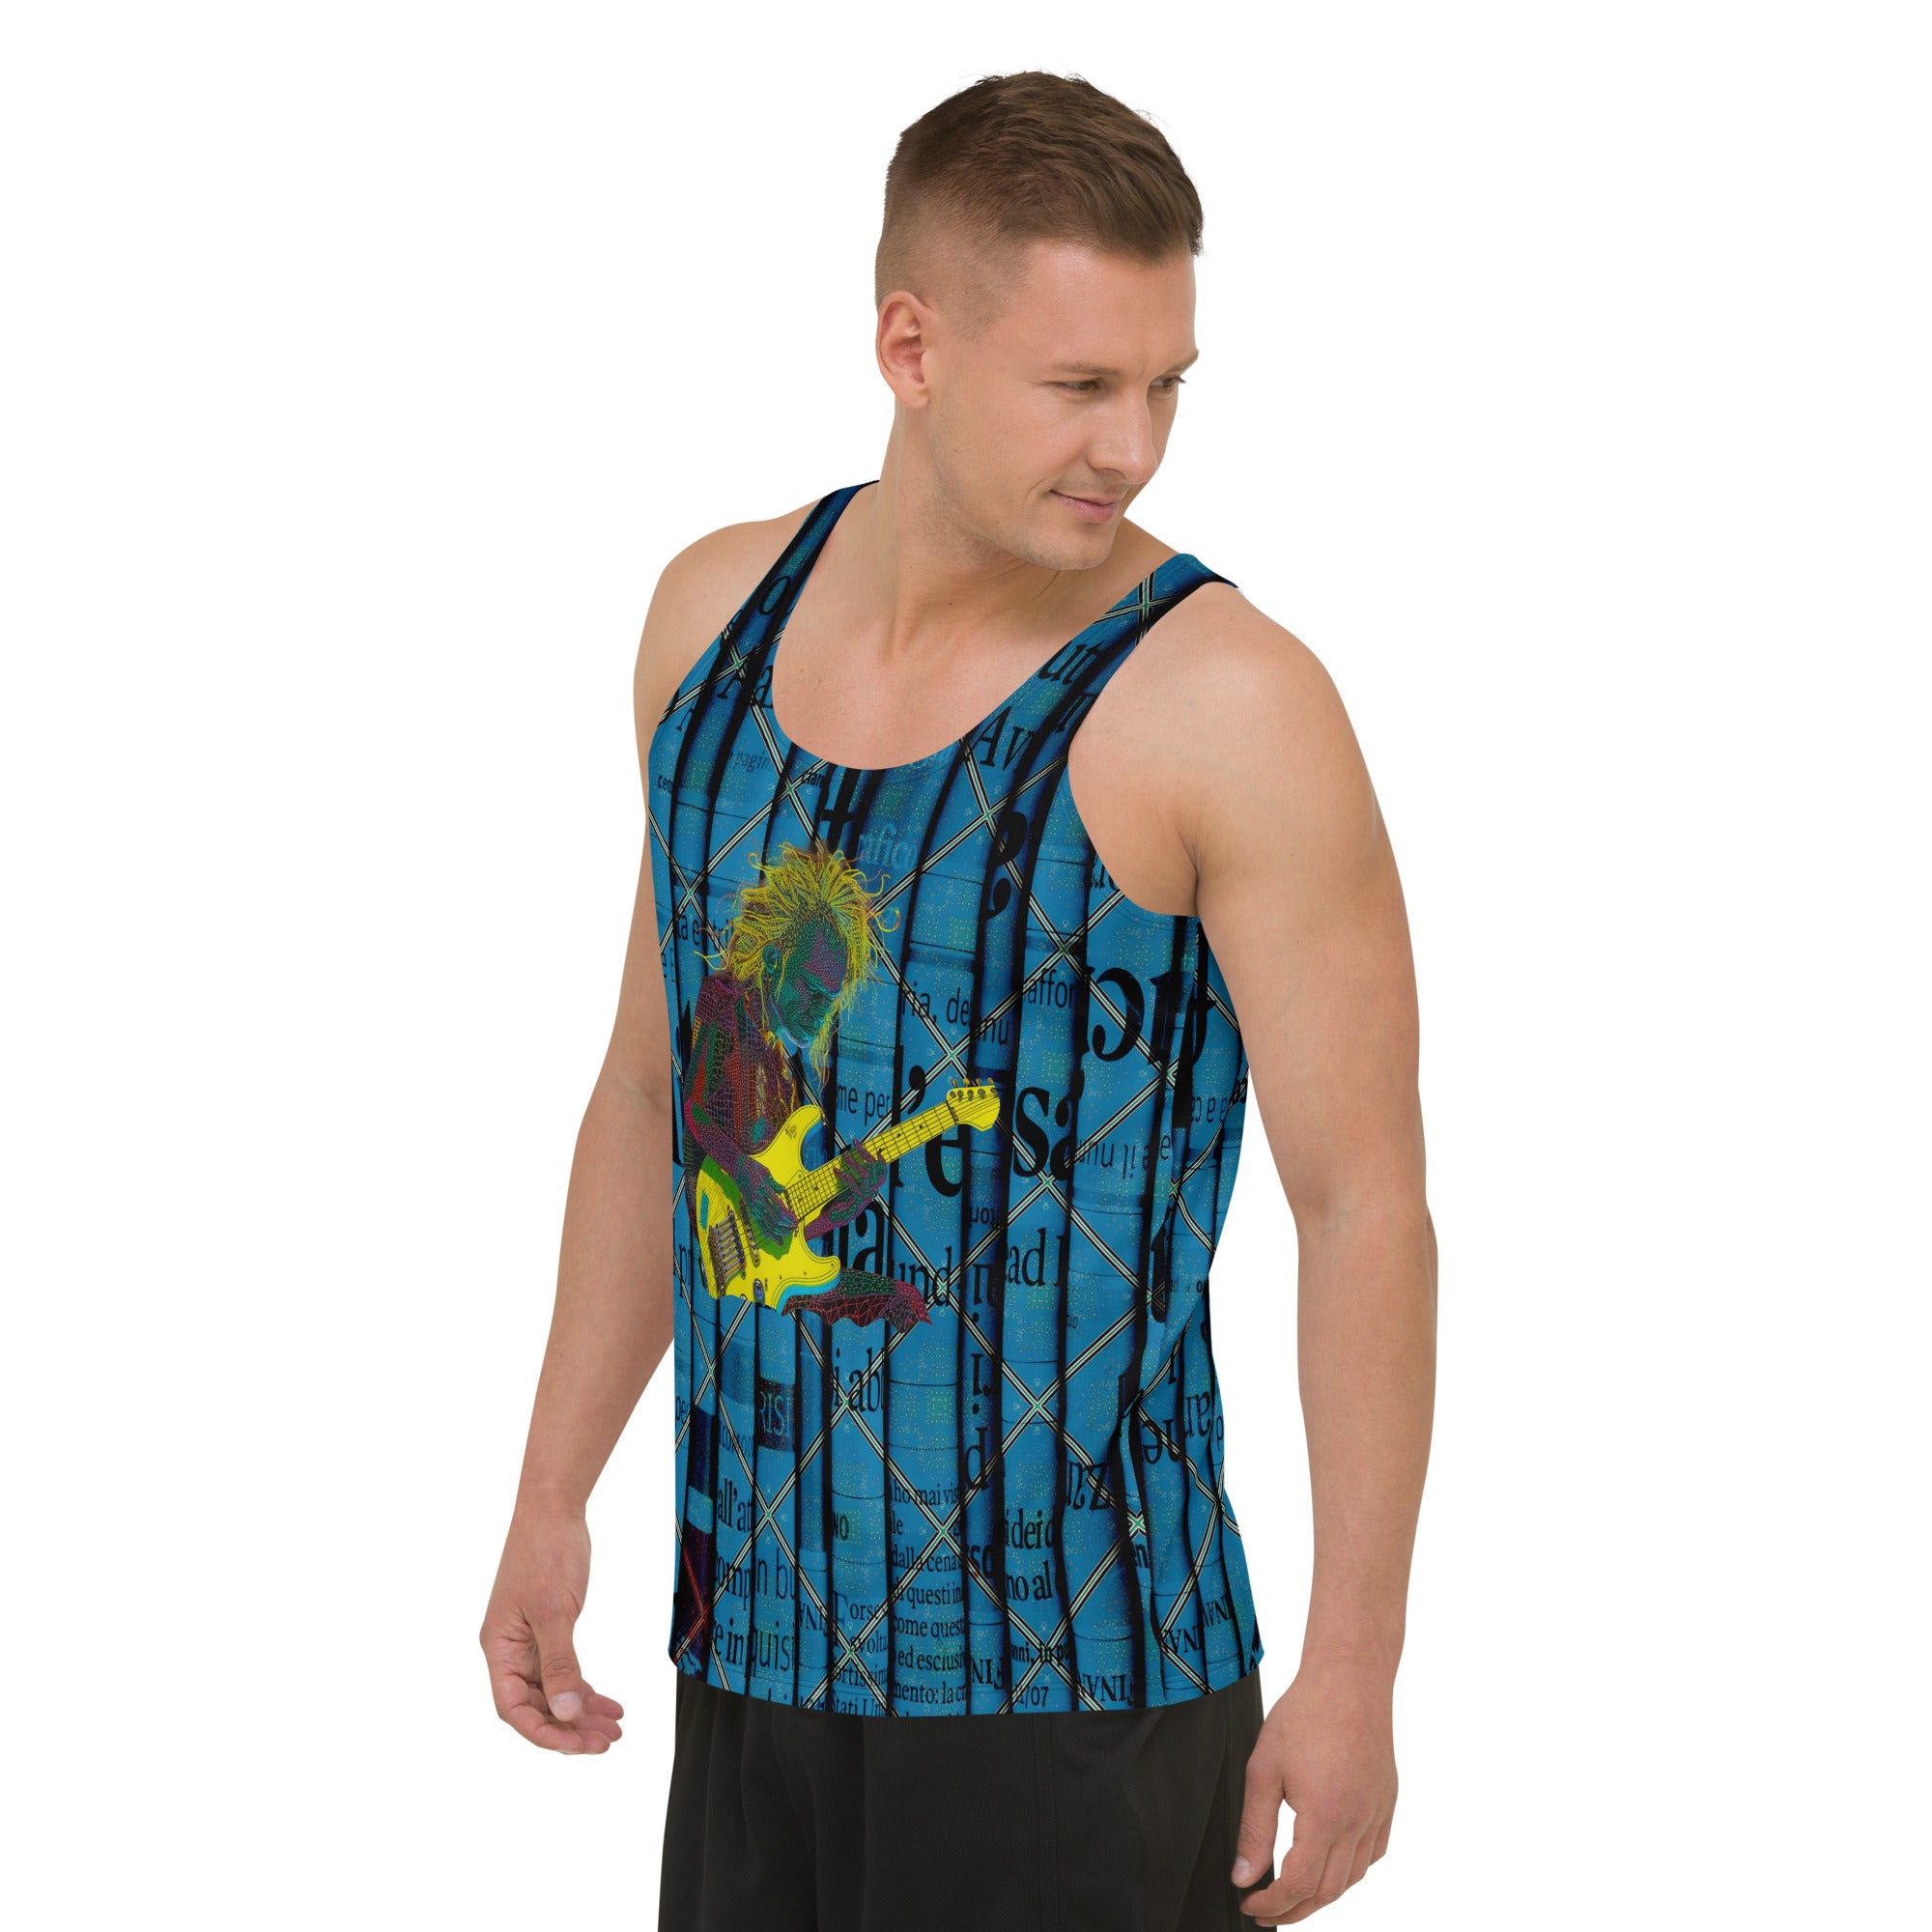 Edgy and colorful neon graffiti tank top for men.